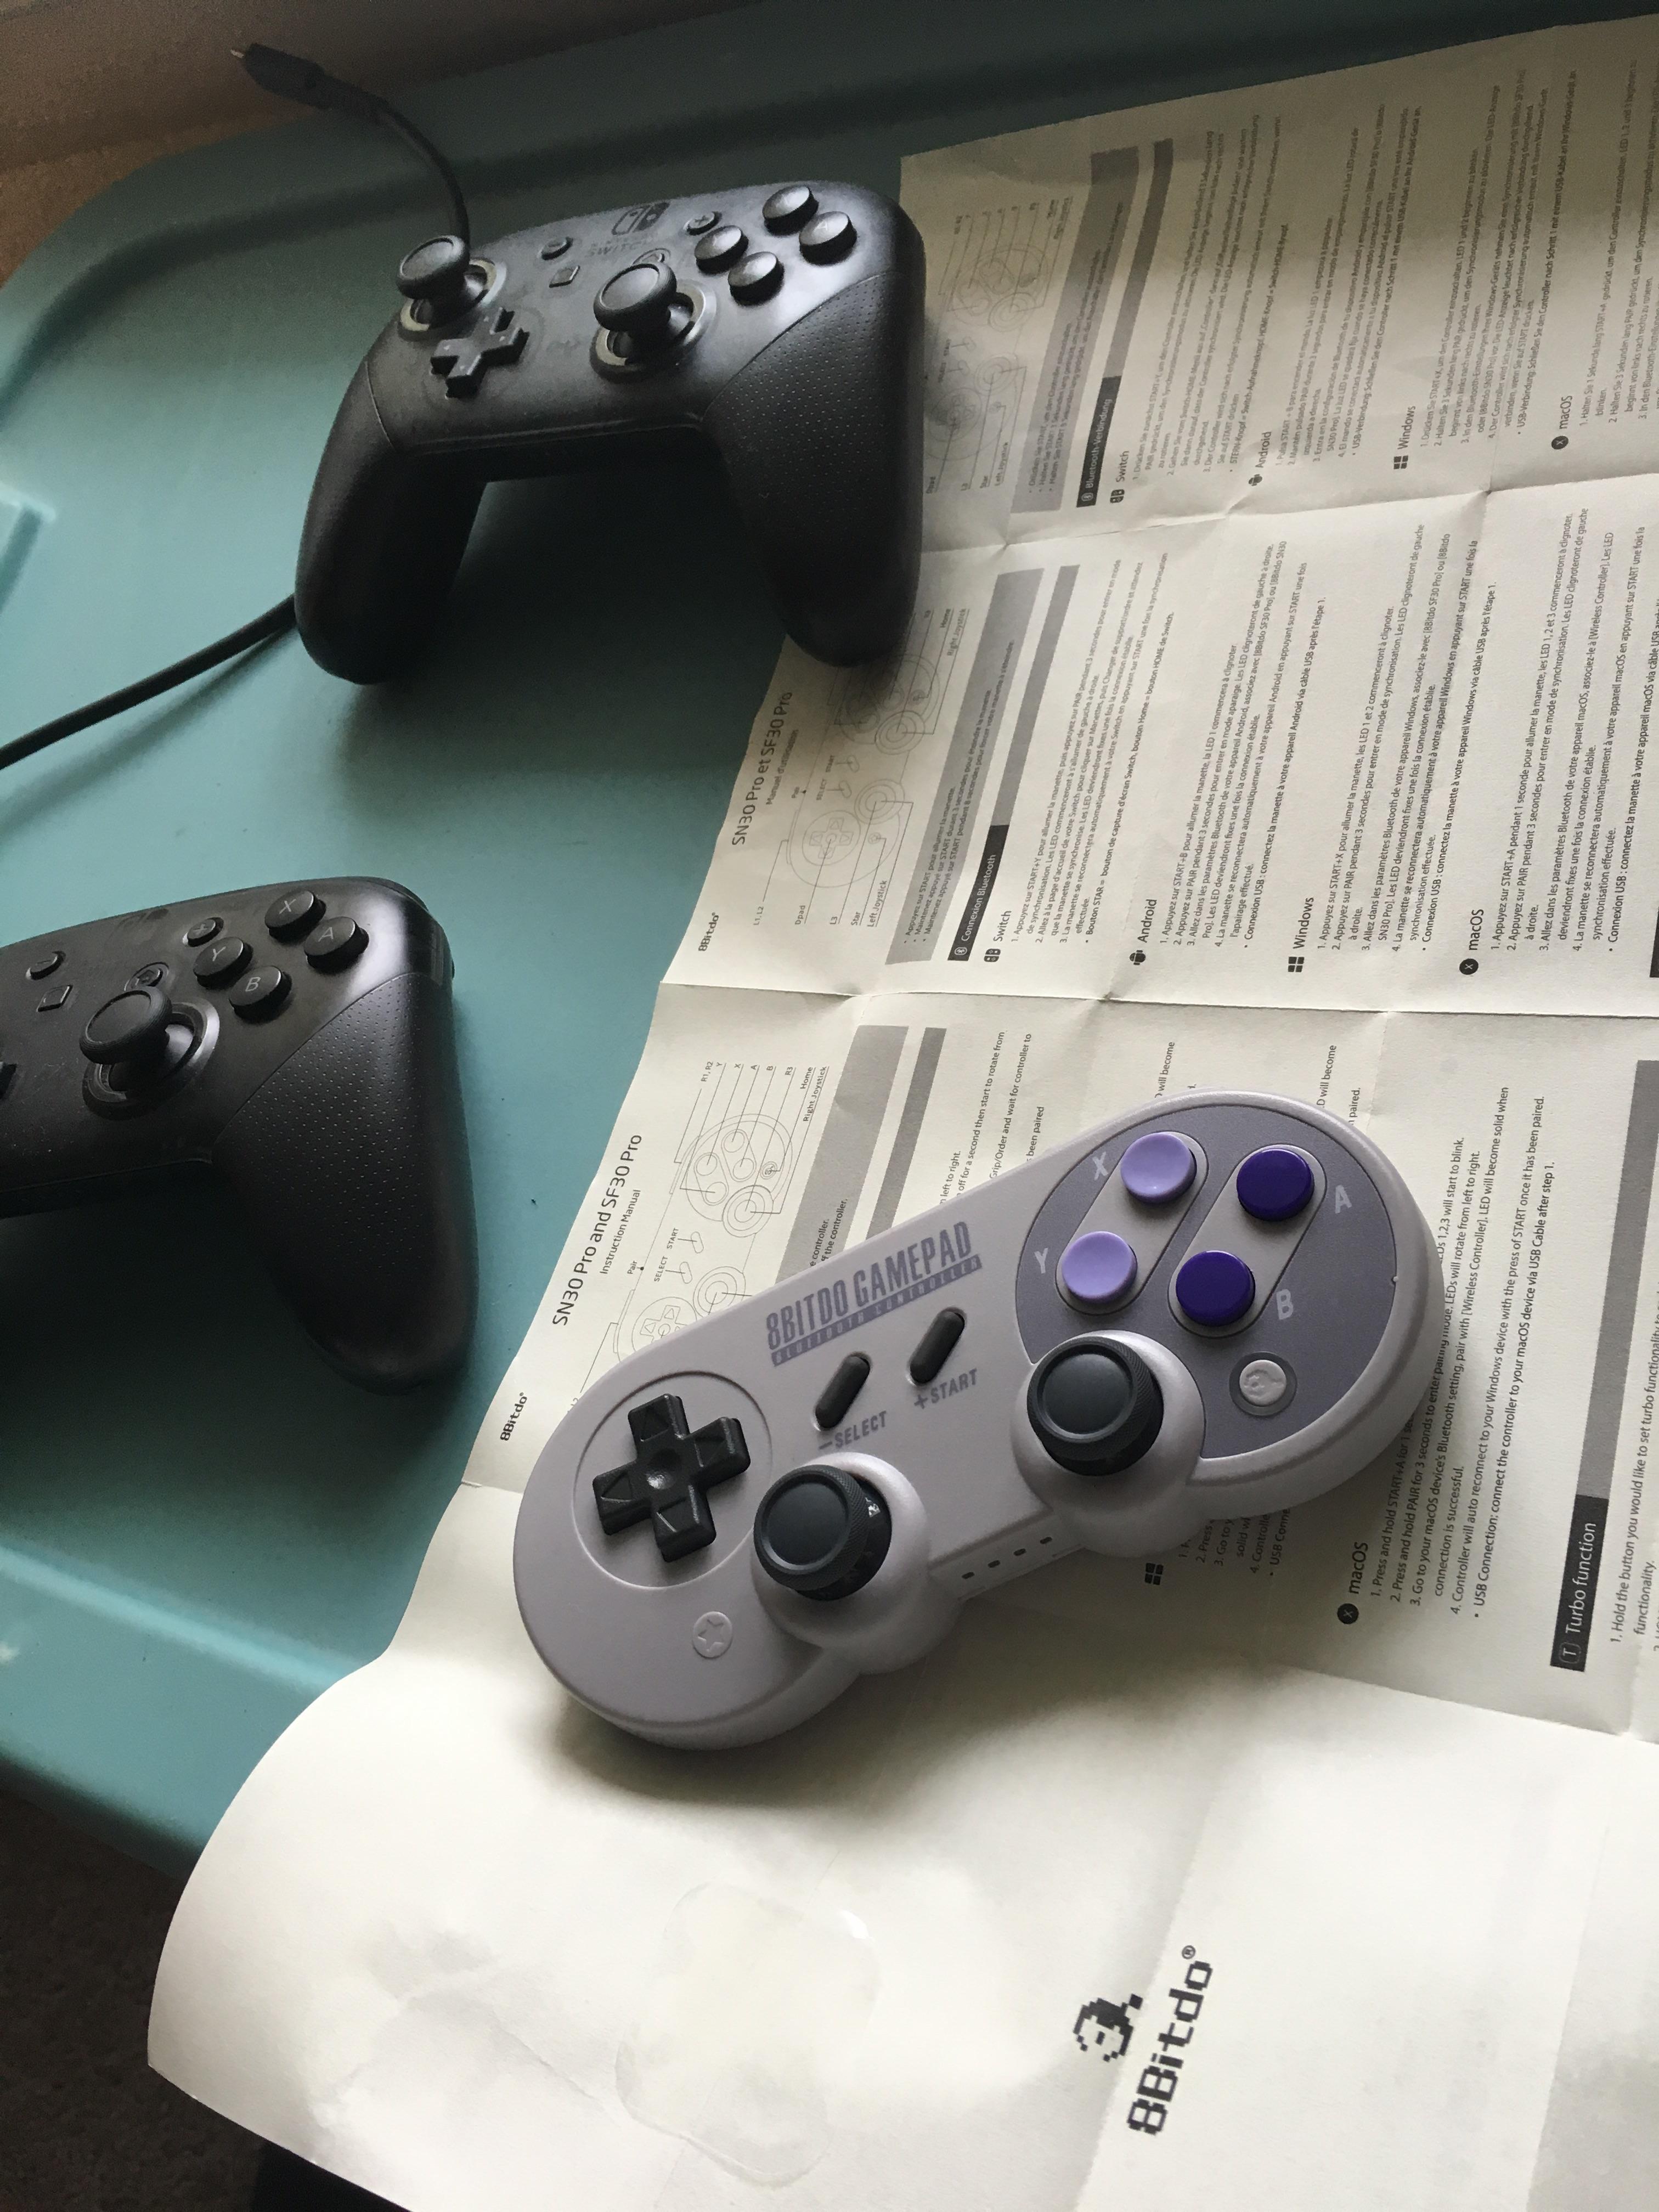 Choose "Change Grip/Order."
Press and hold the SYNC button on the Pro Controller again until the lights start flashing.